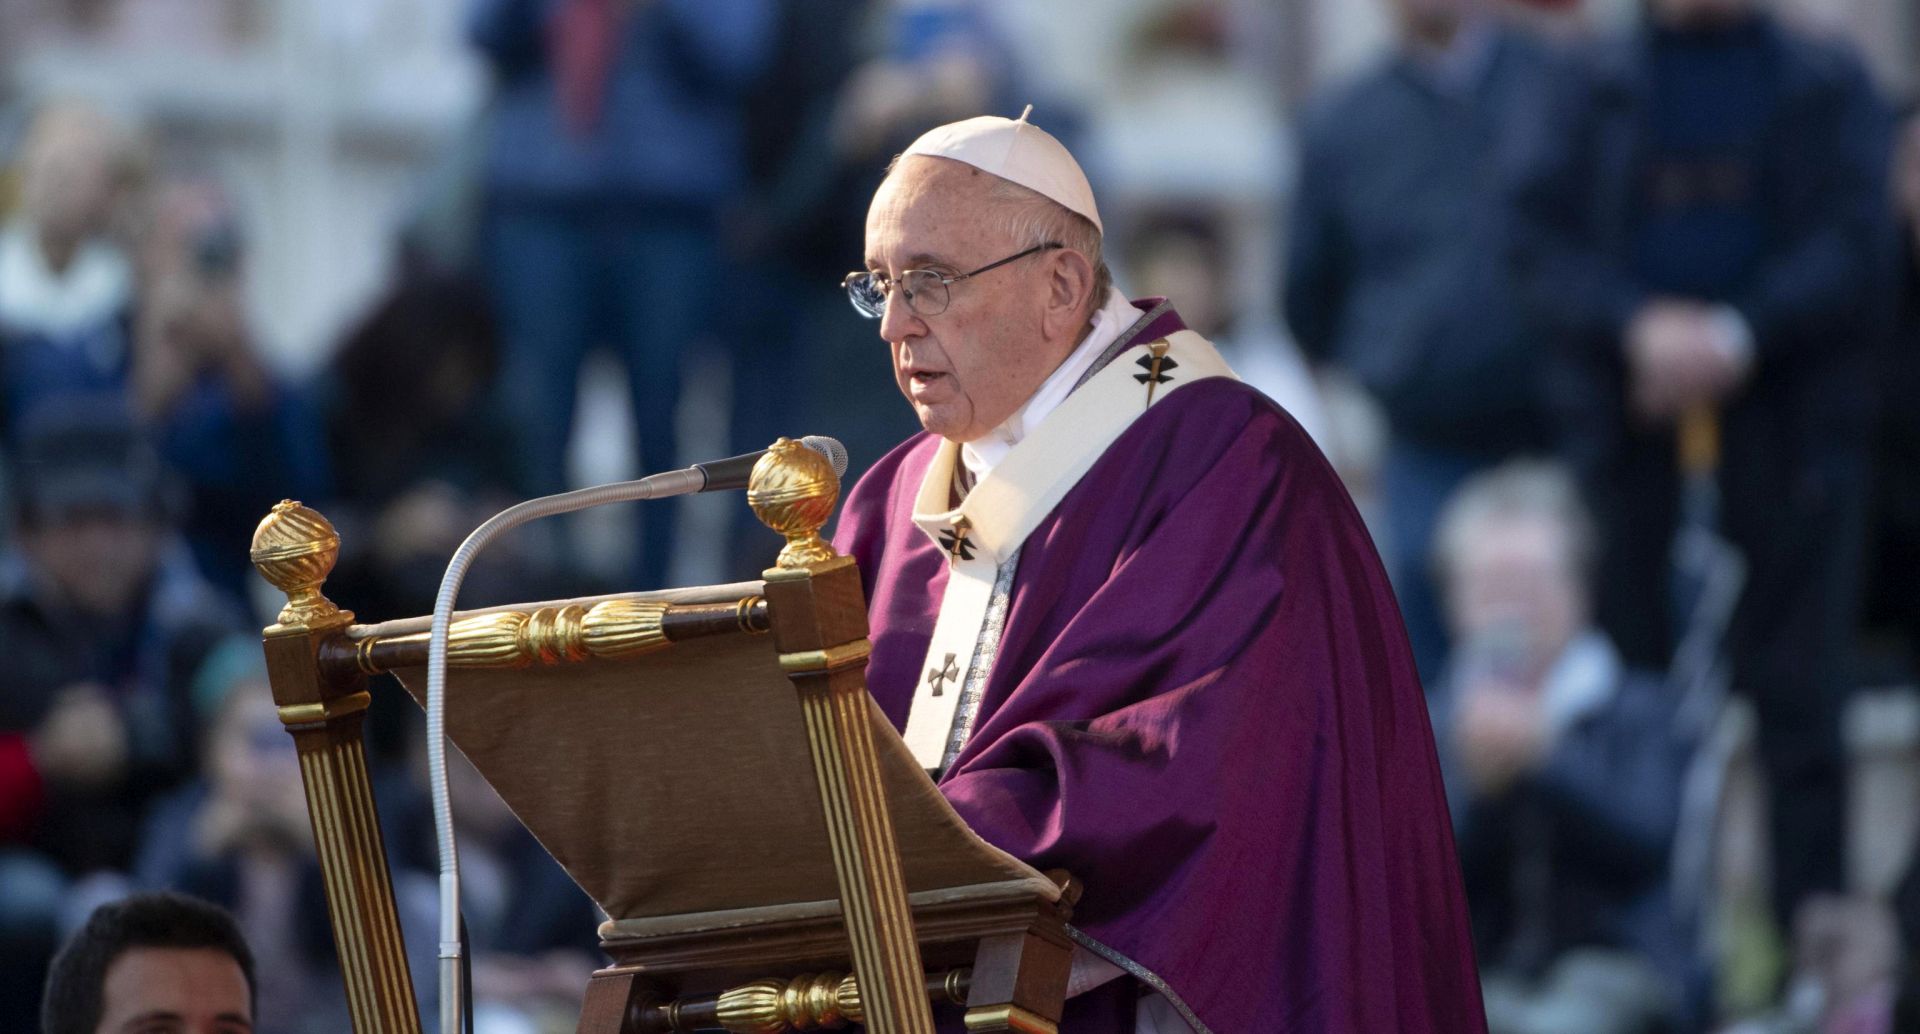 epa07137067 Pope Francis celebrates a mass for the commemoration of the dead at the Laurentino Cemetery on the occasion of All Souls' Day, in Rome, Italy, 02 November 2018. All Souls’ Day is observed on 02 November and for Roman Catholics a day to commemorate all the faithful departed who are believed to be in purgatory.  EPA/MAURIZIO BRAMBATTI